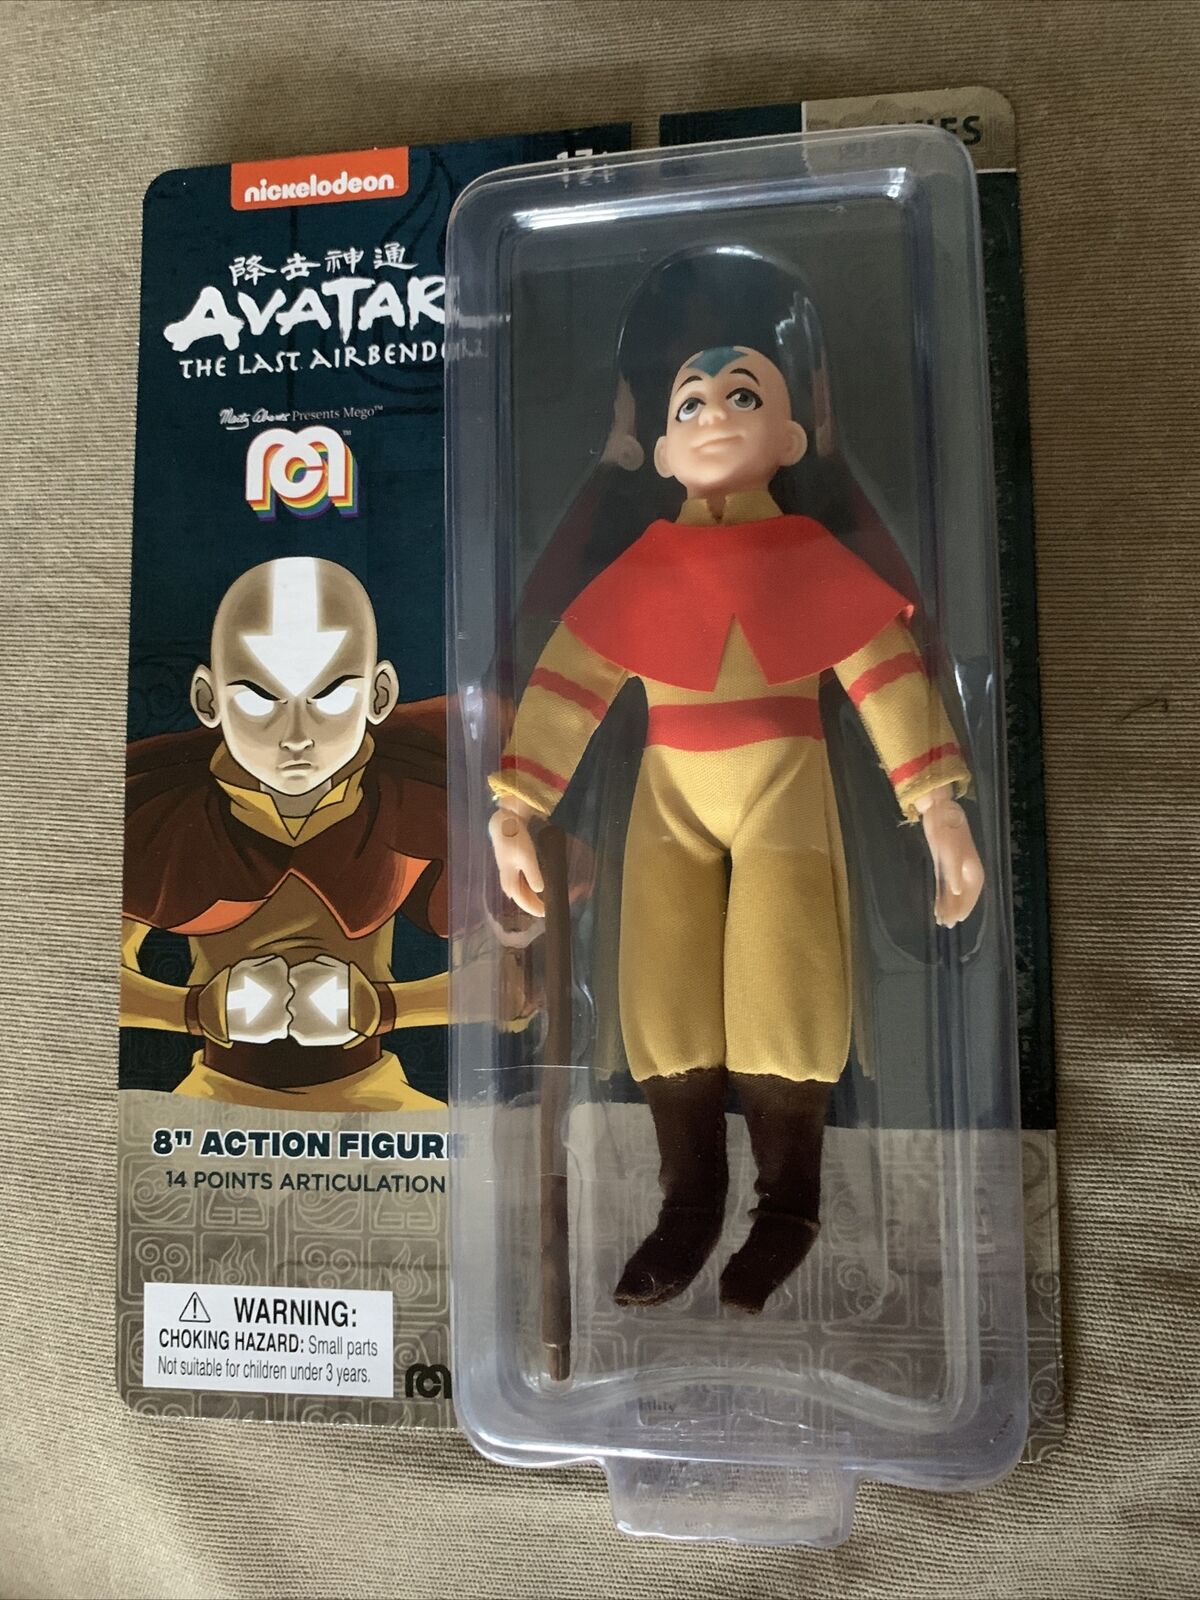 MEGO AVATAR THE LAST AIRBENDER AIR BENDER AANG SHIPPING NOW AND IN HAND!!